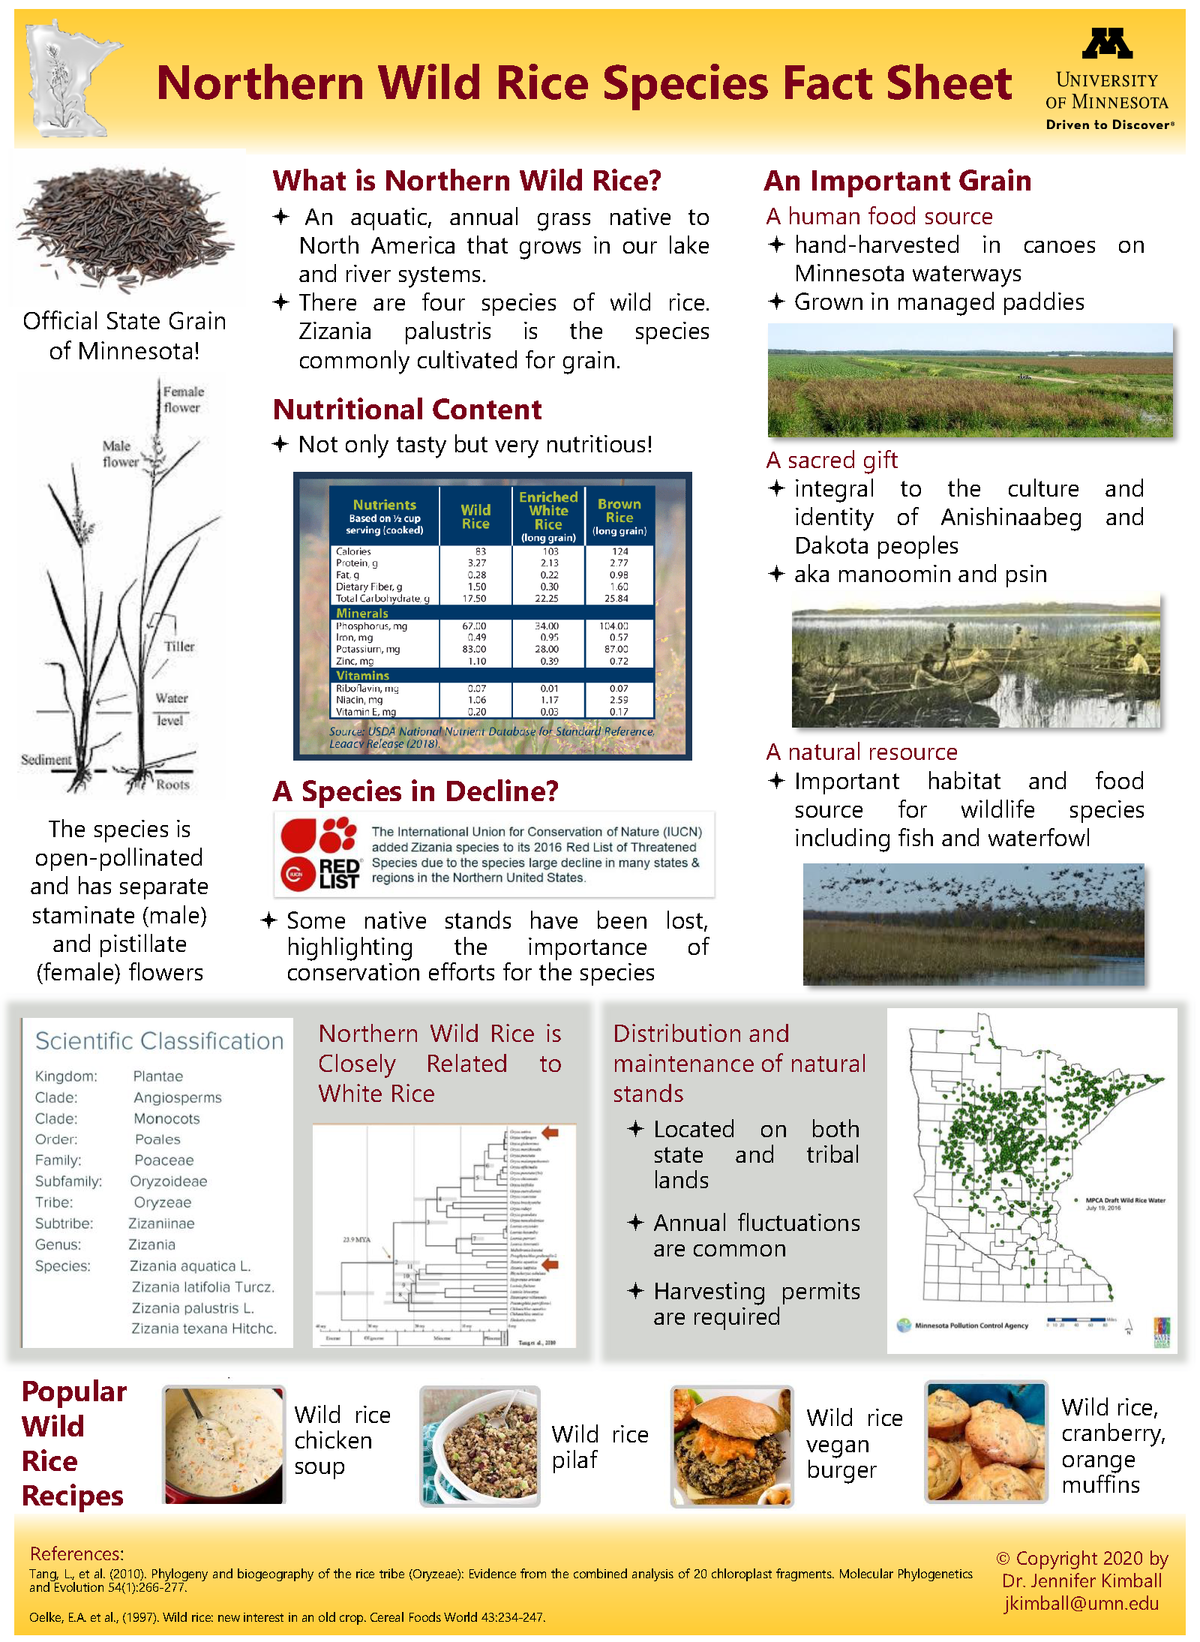 General information about wild rice including its taxonomic information and distribution 